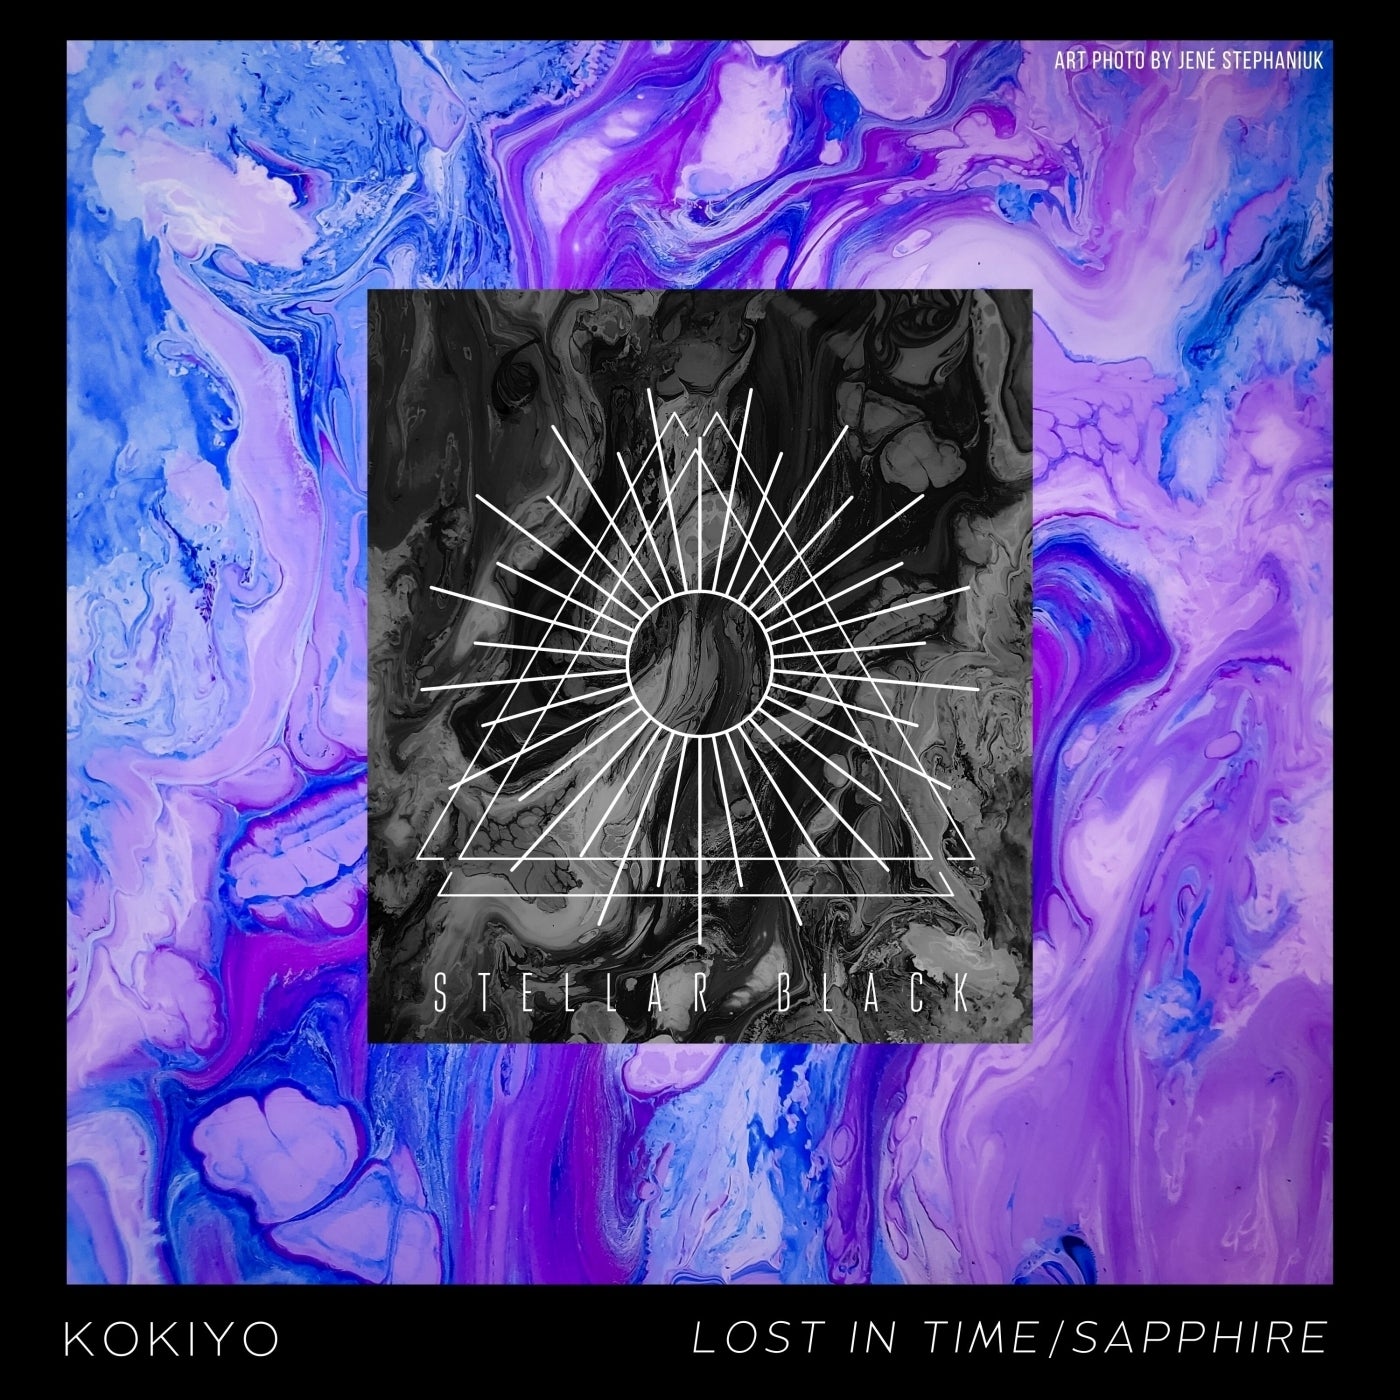 Lost in Time/Sapphire